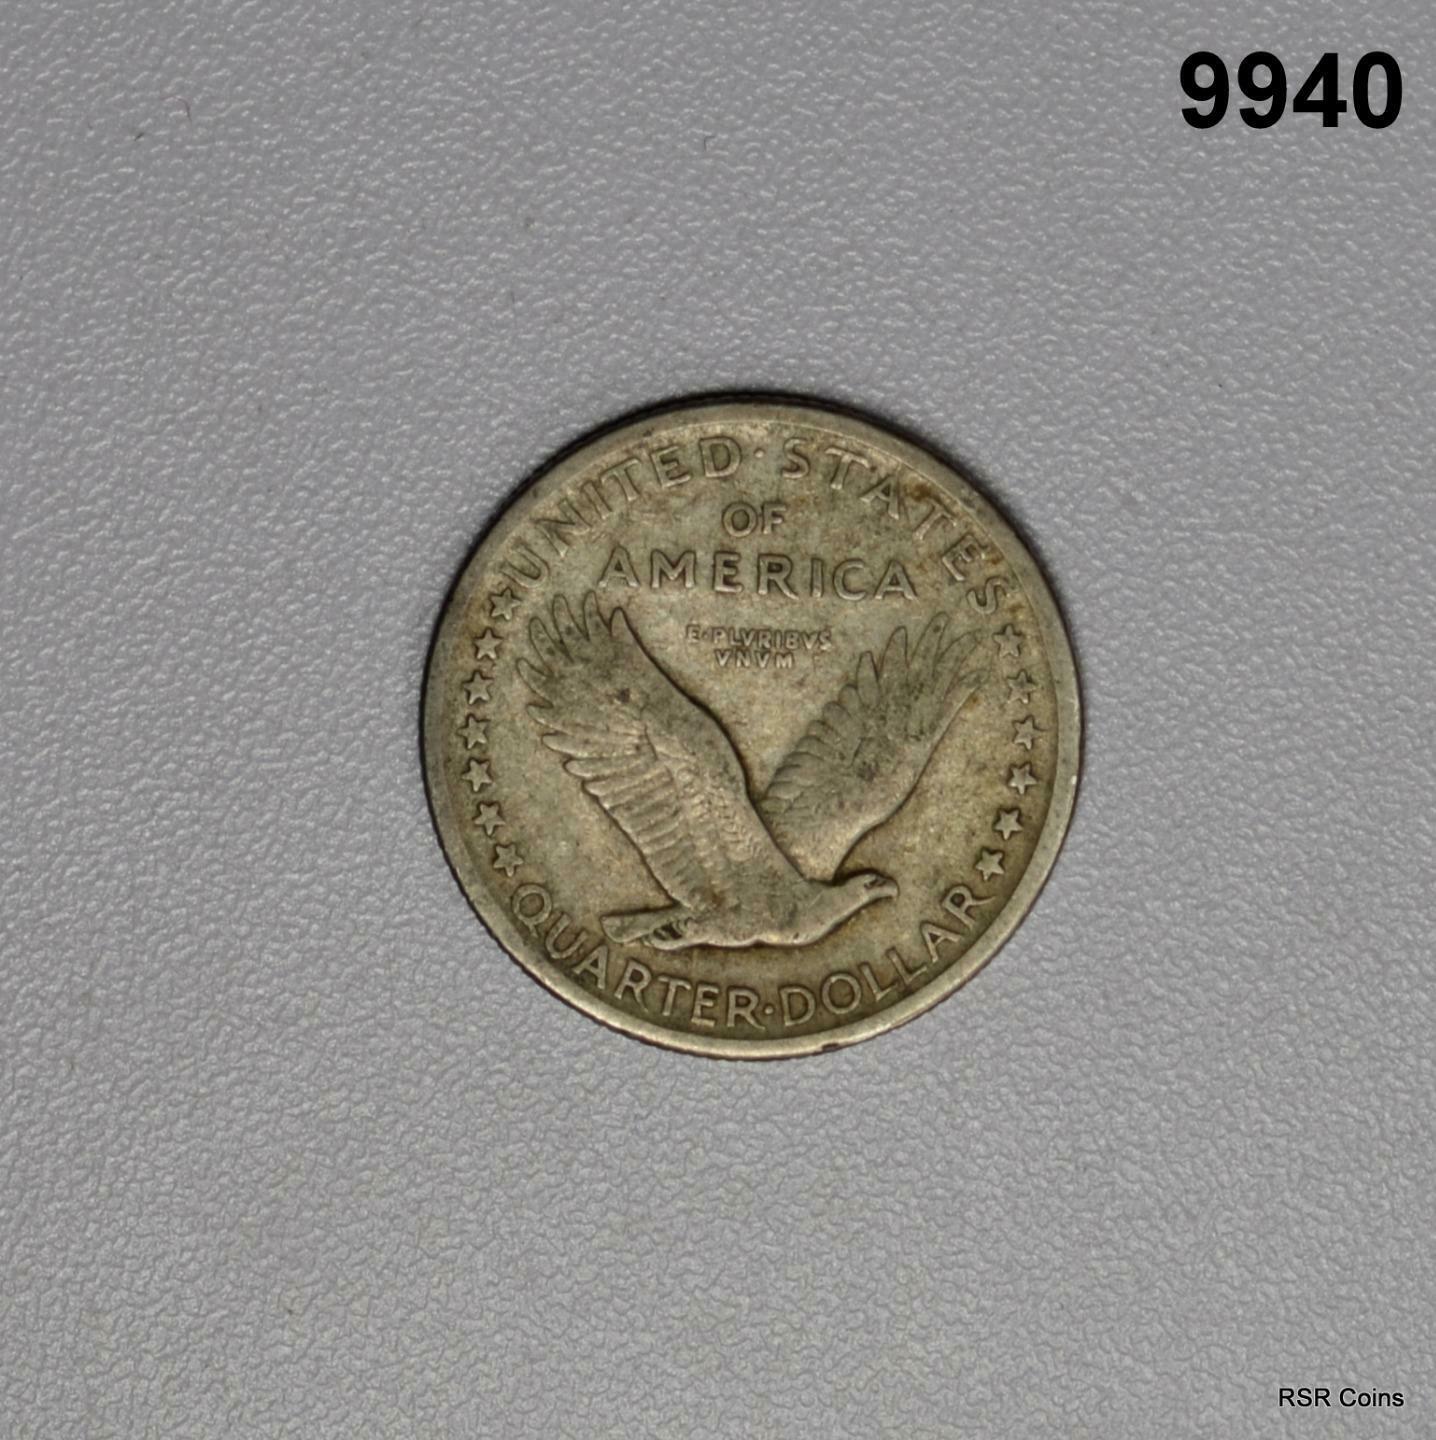 1917 S STANDING QUARTER TYPE 1 HAIR LINED DATE #9940